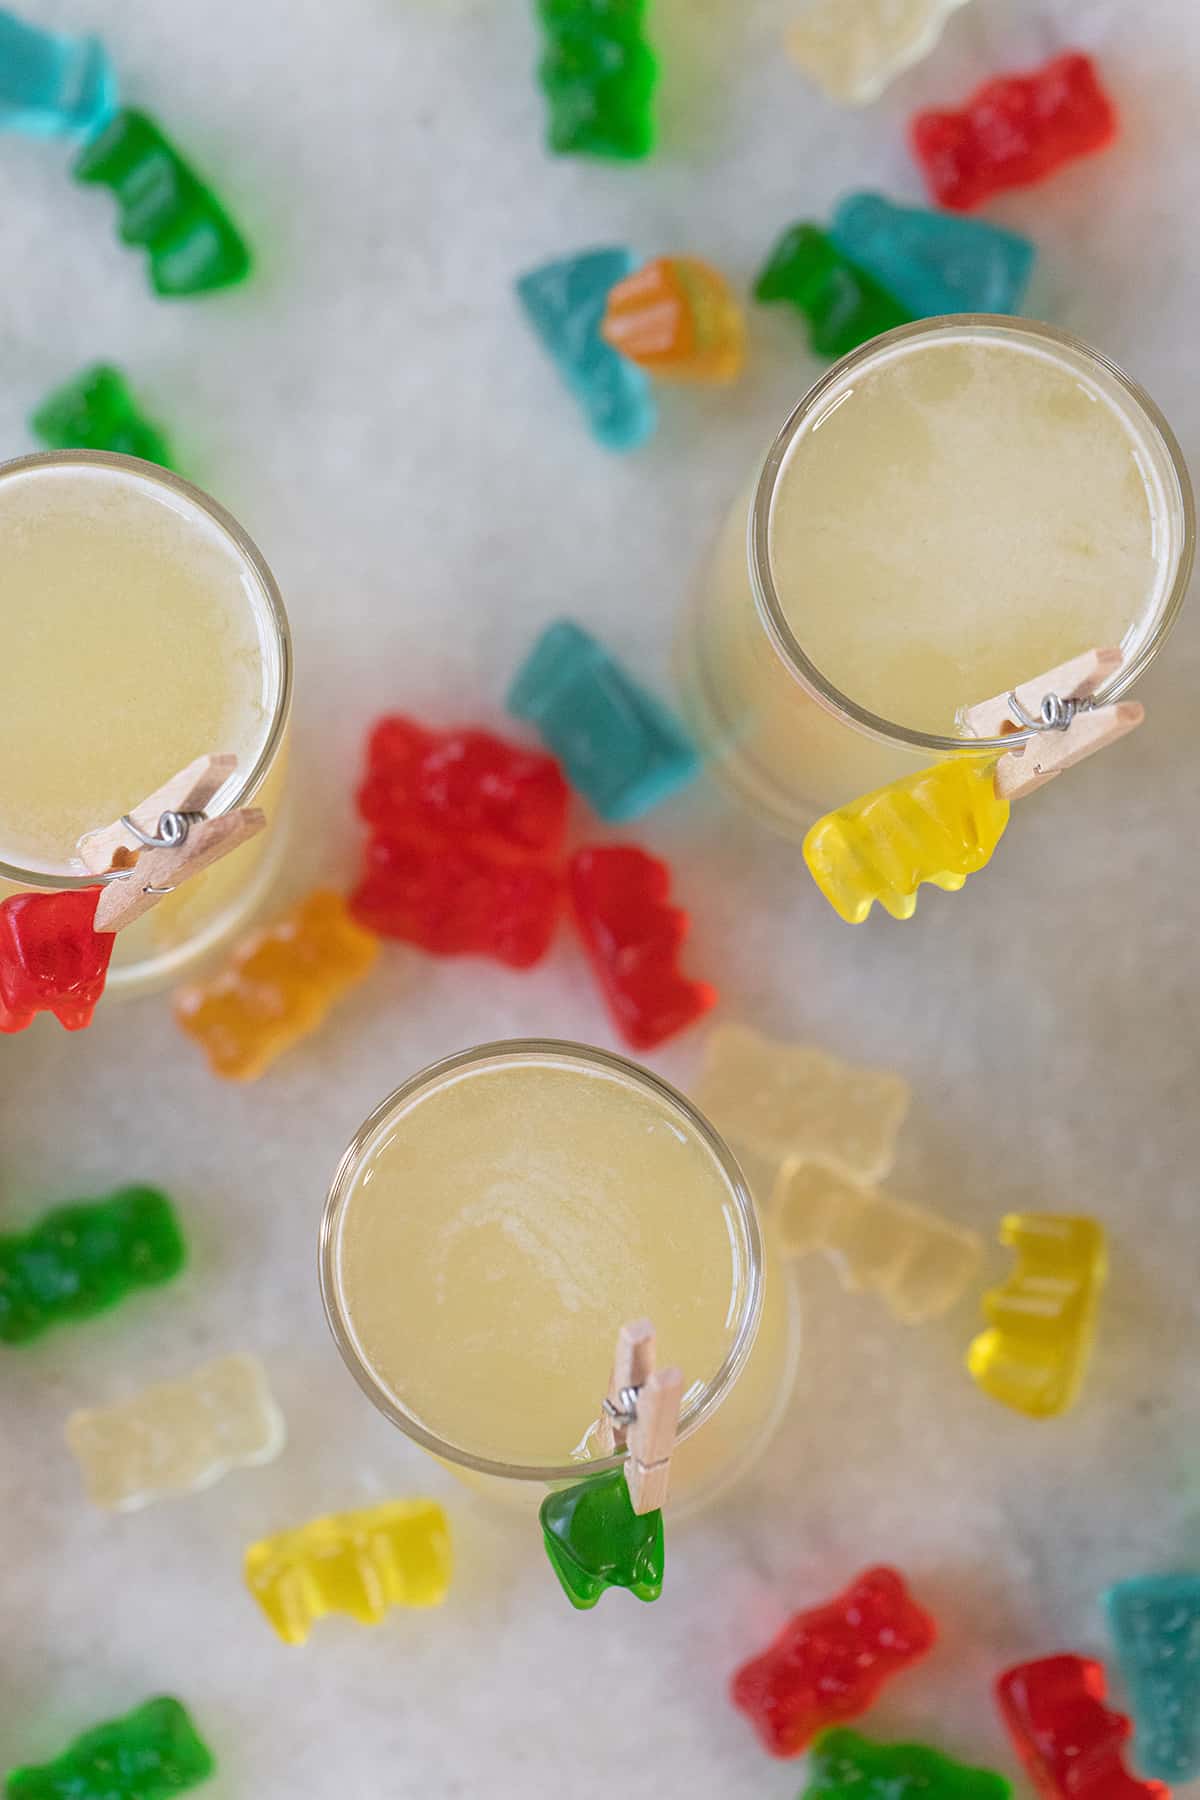 Colorful shots with candy.